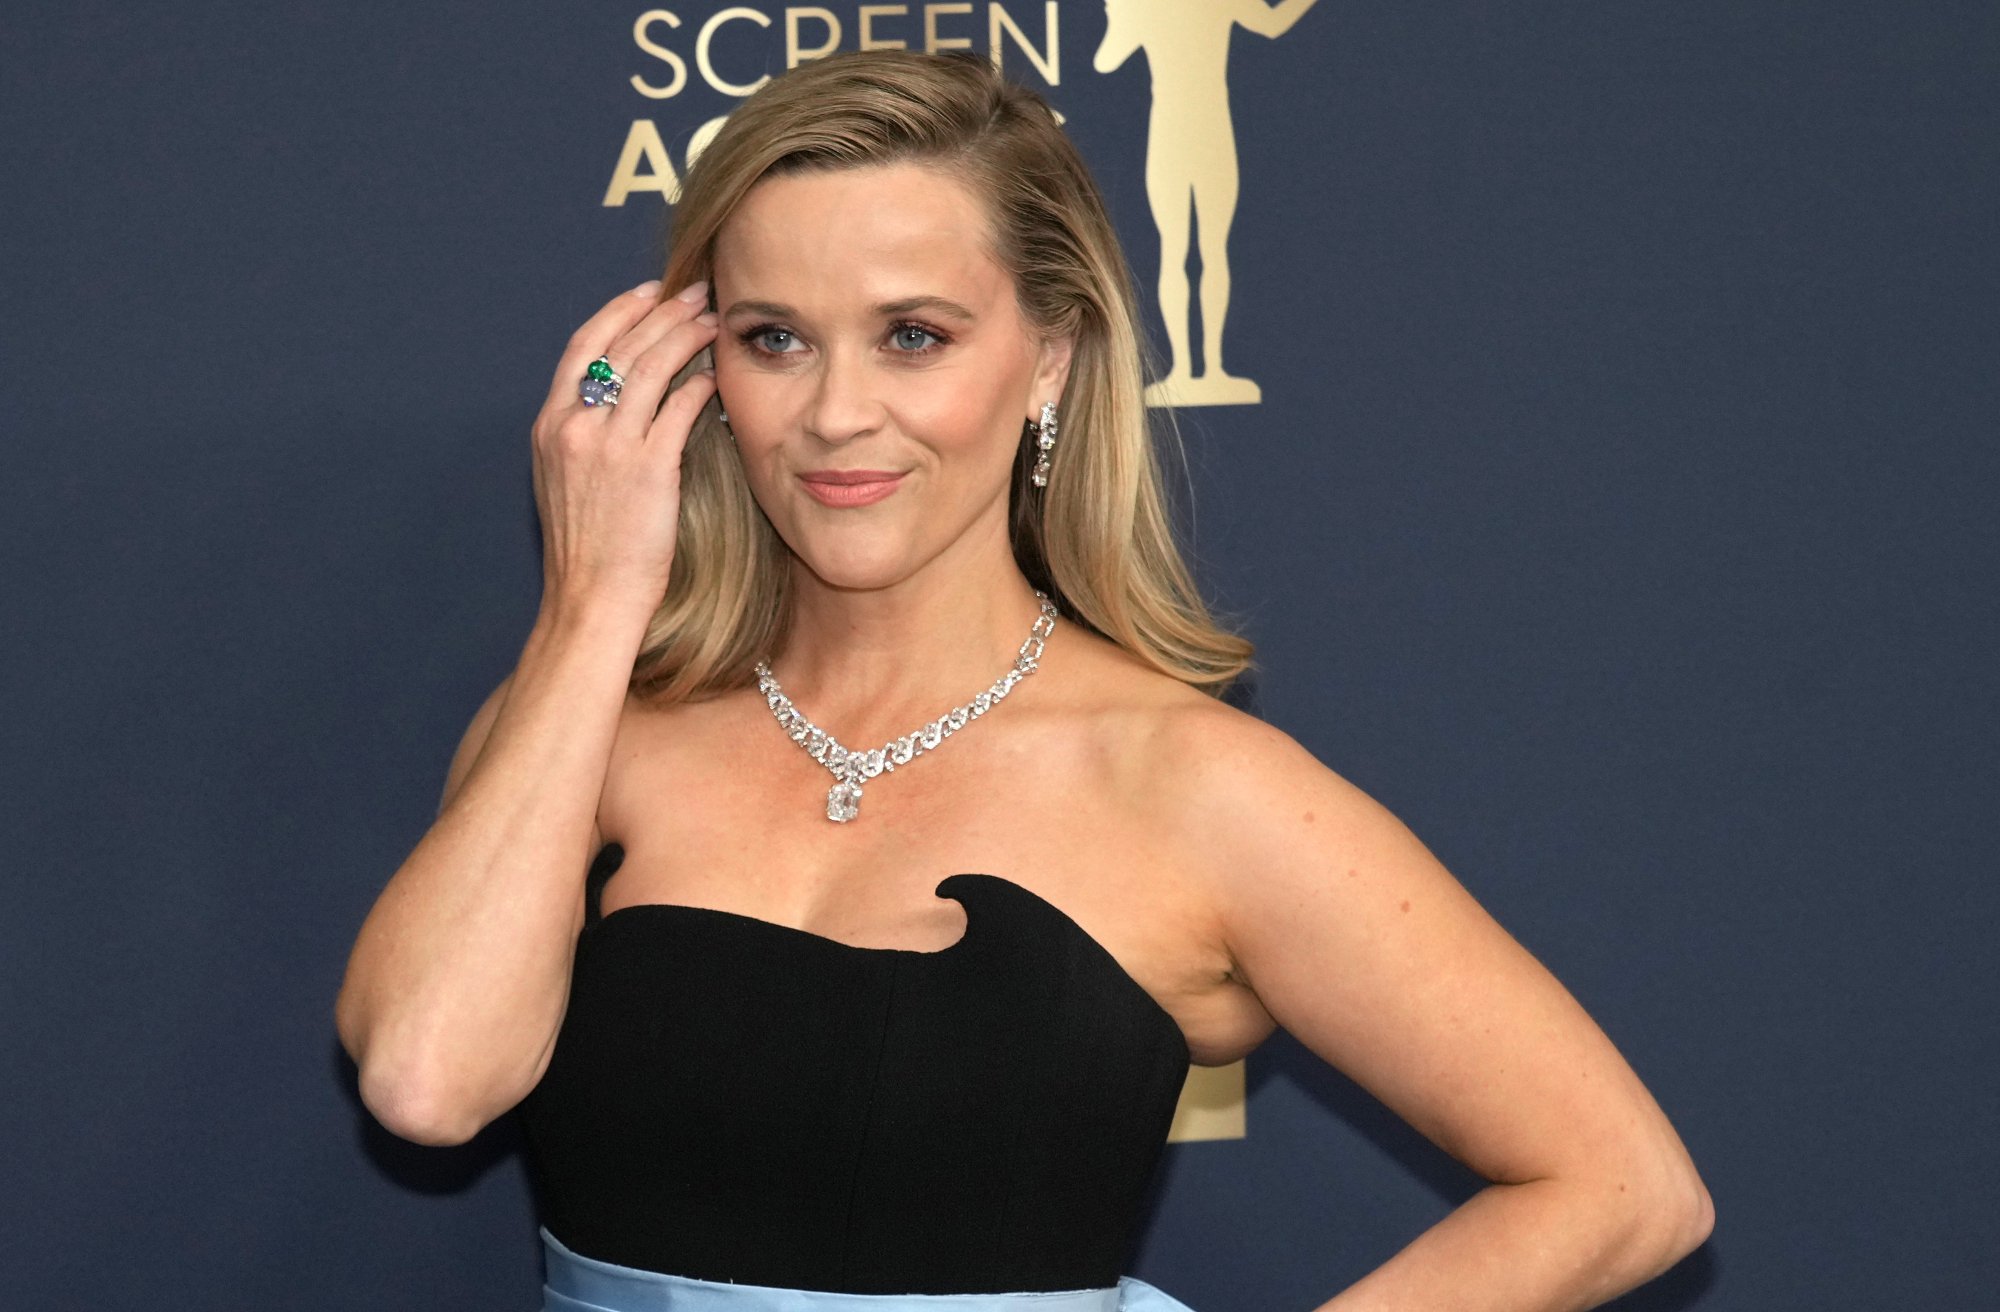 'Legally Blonde 3' actor Reese Witherspoon wearing a black dress in front of Screen Actors Guild logo with her hand brushing back her hair behind her ear